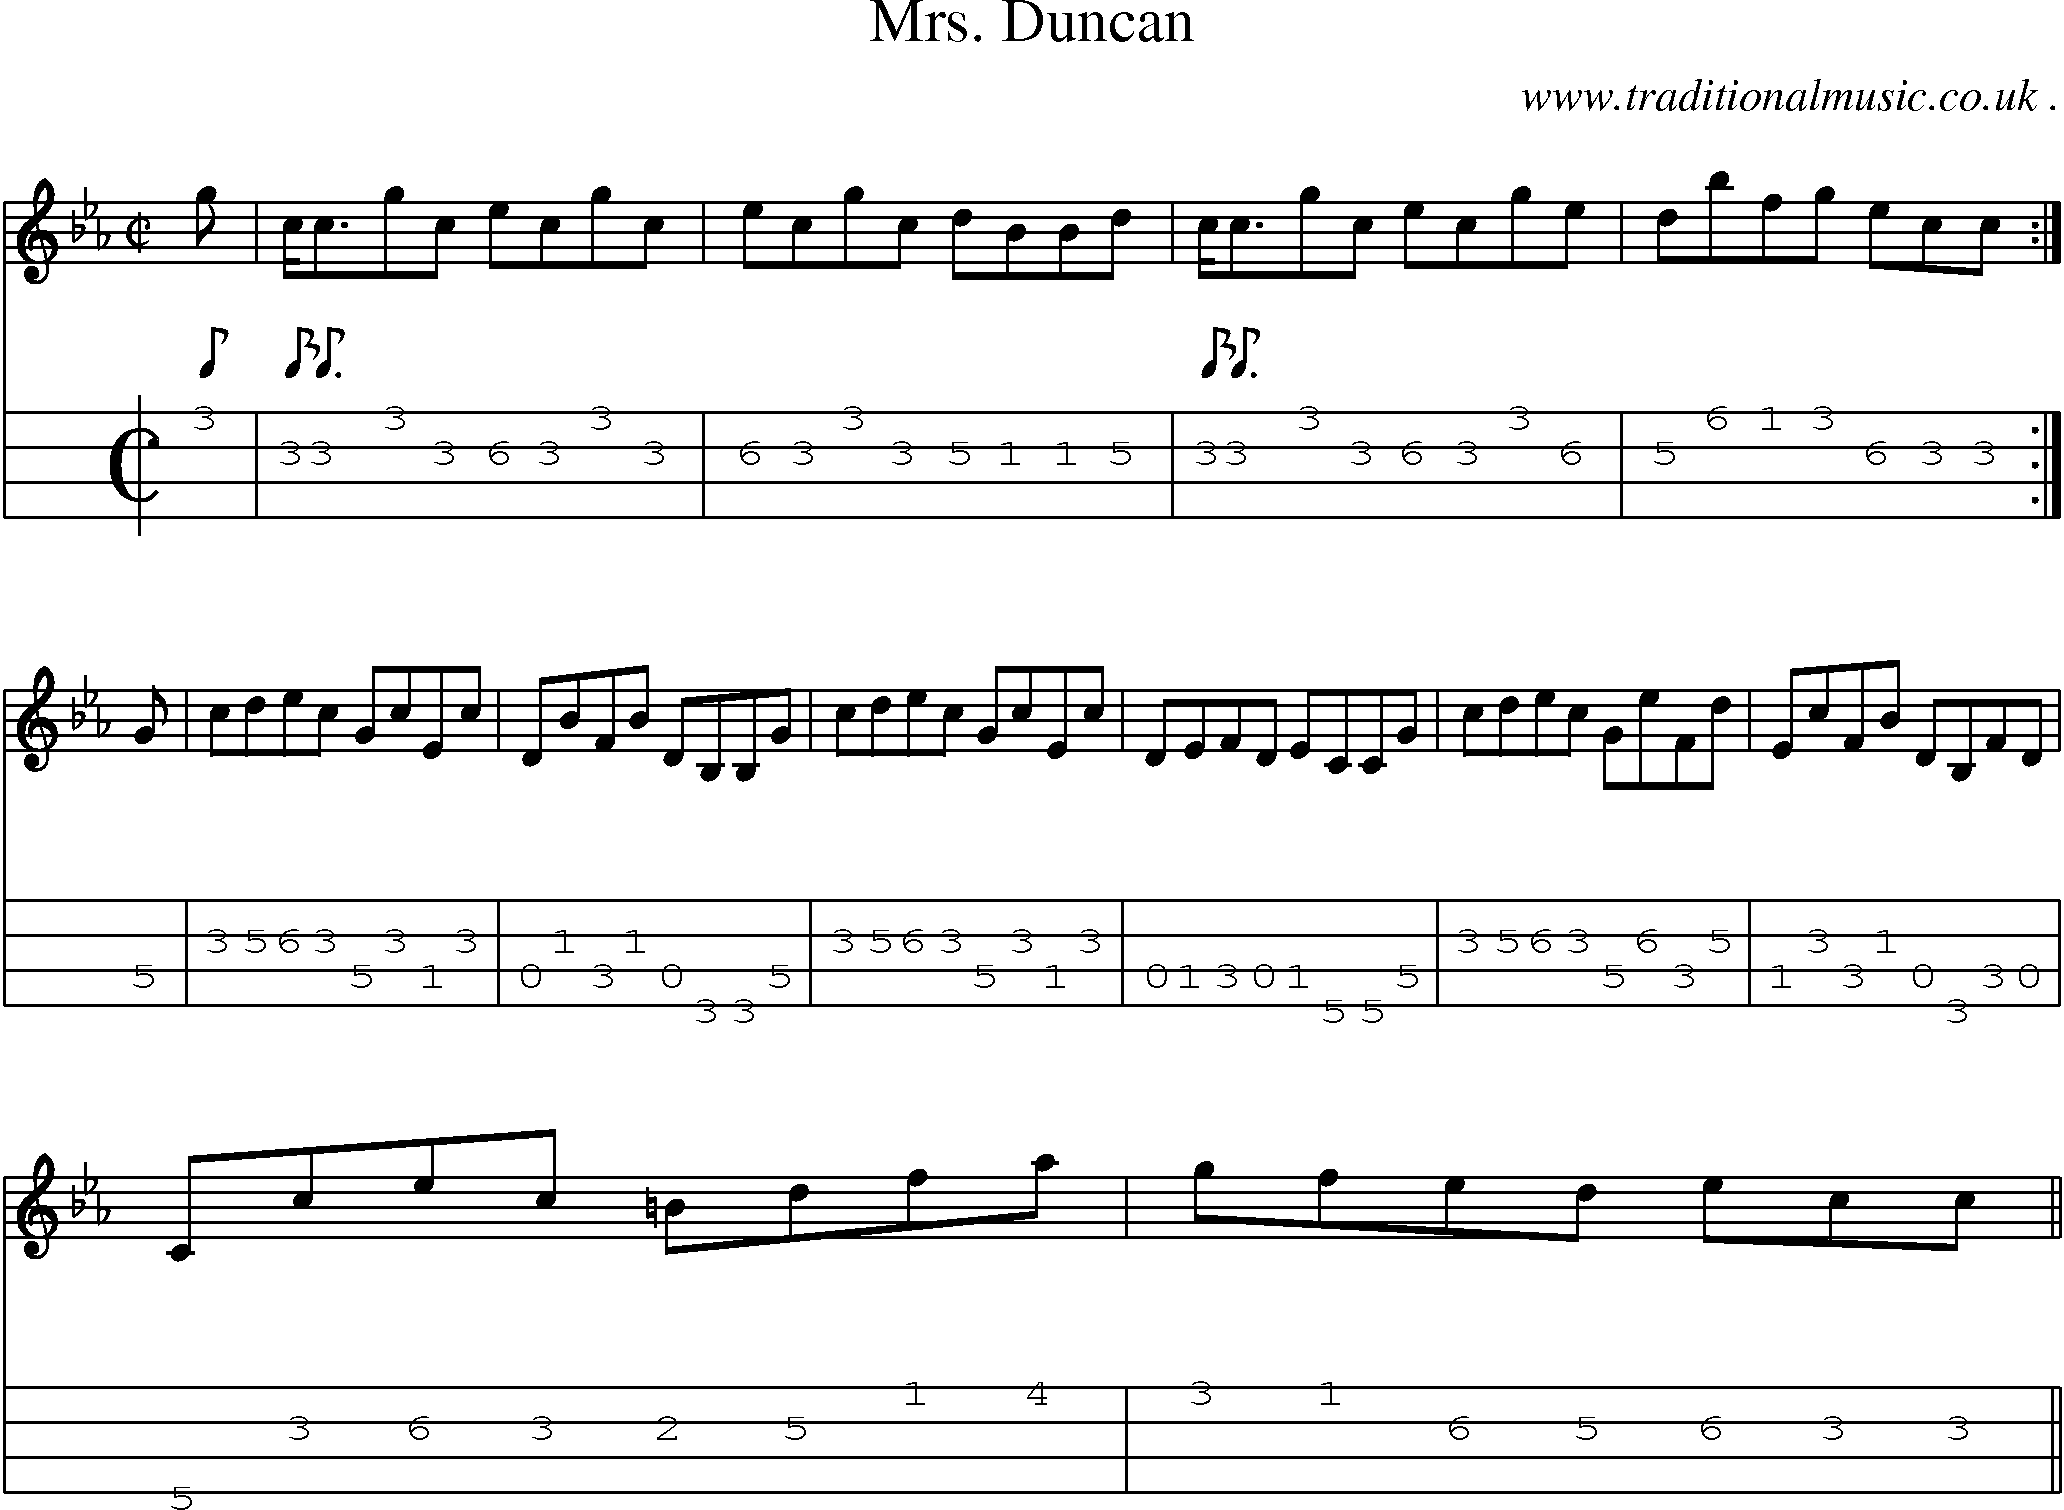 Sheet-music  score, Chords and Mandolin Tabs for Mrs Duncan